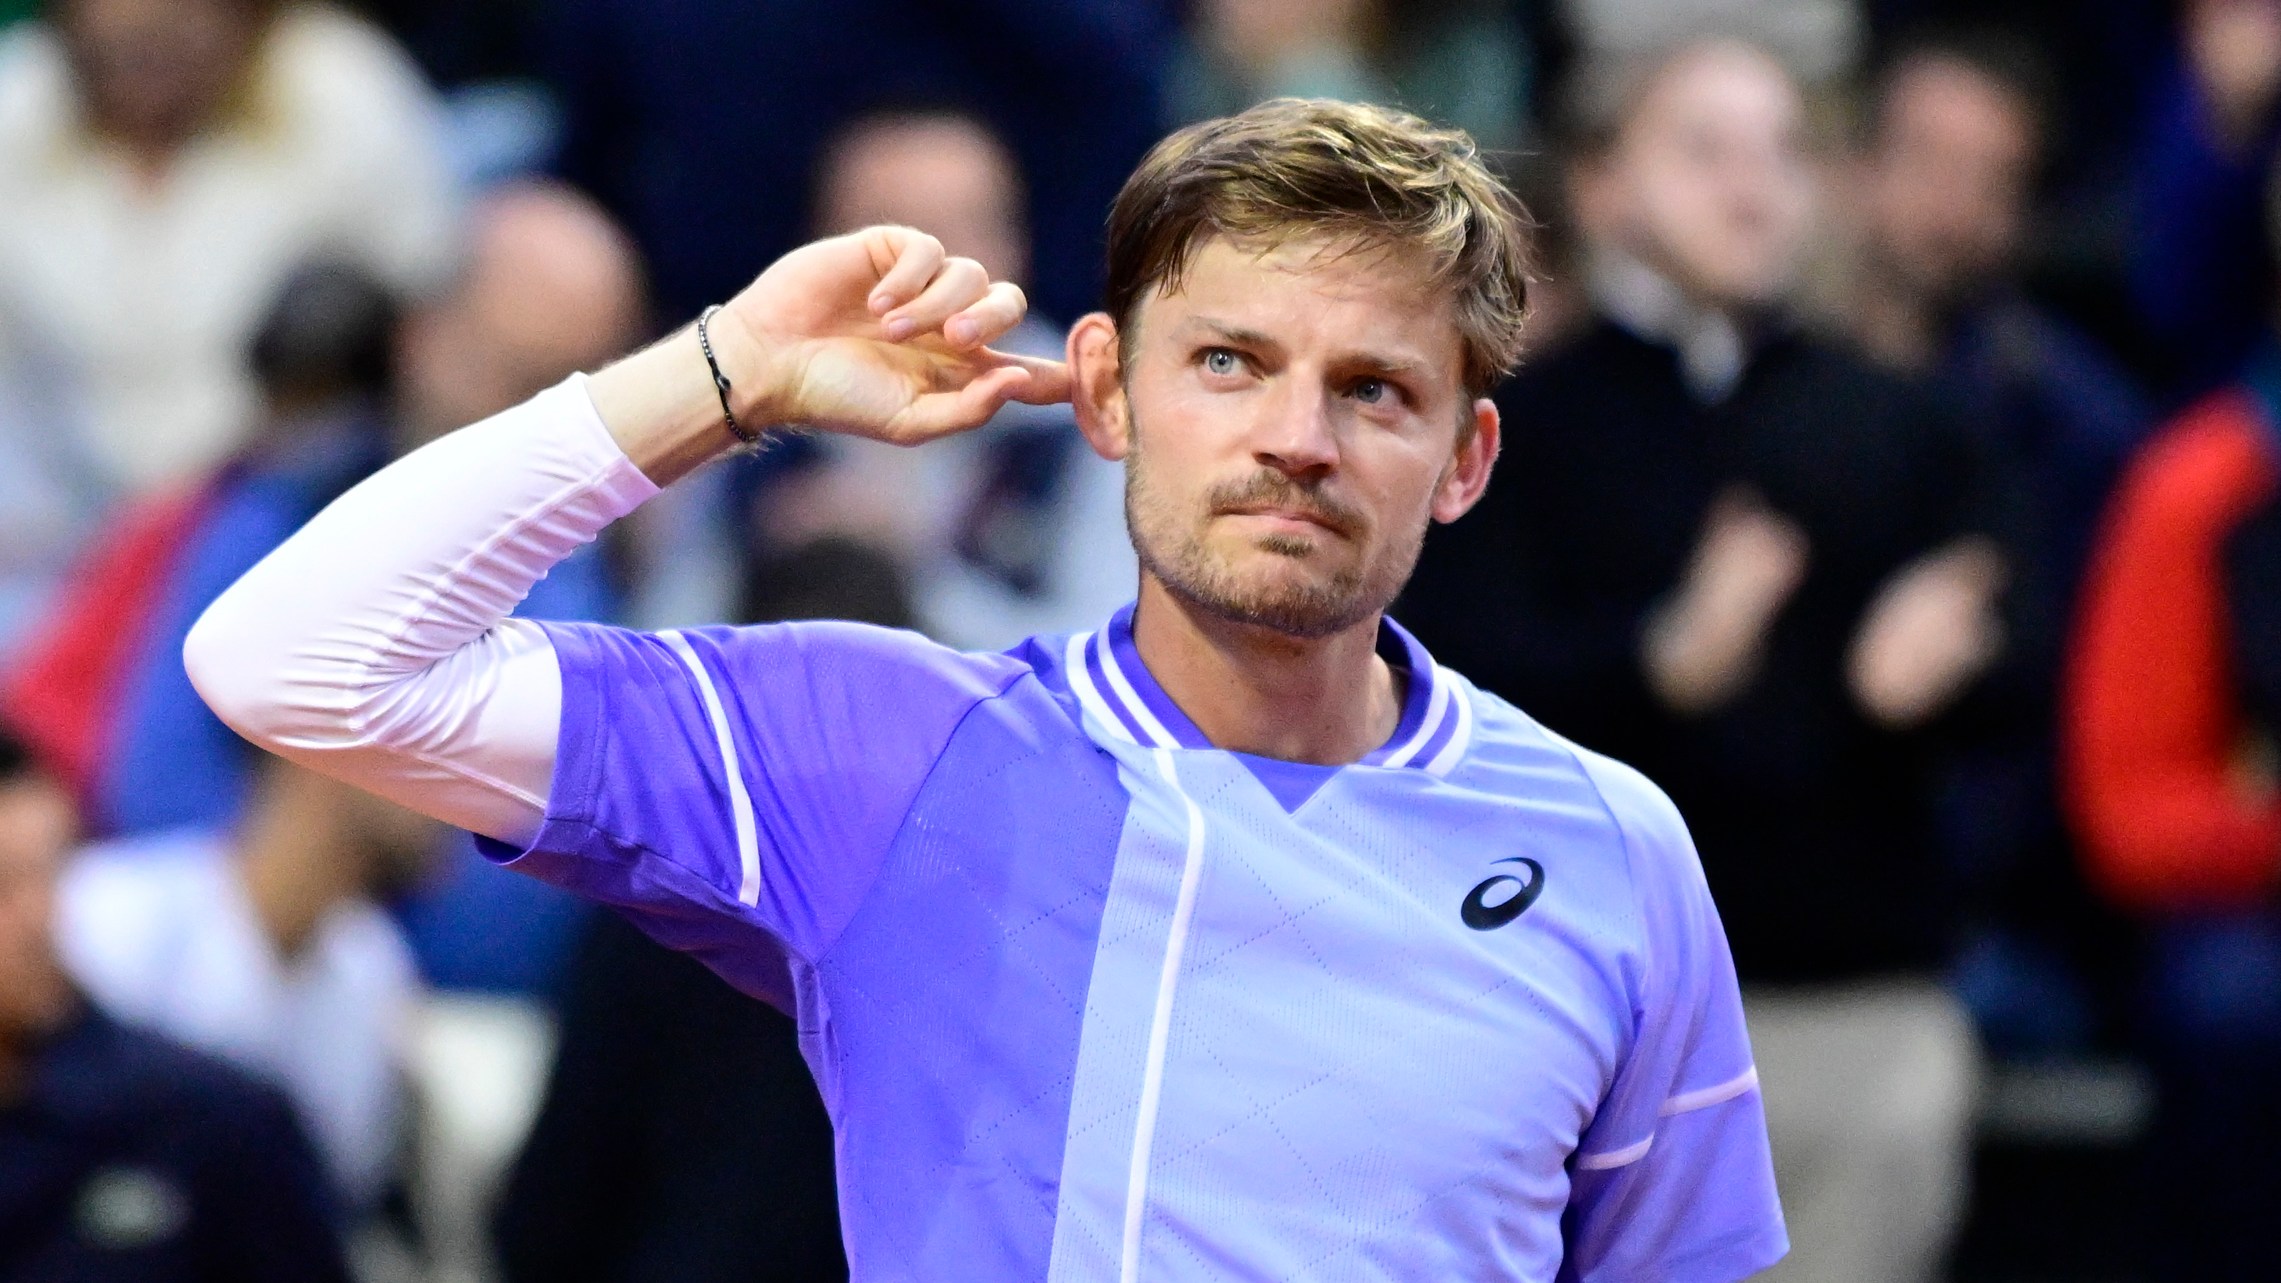 A frustrated Goffin gestures to the crowd after facing abuse during his hard-fought win against Mpetshi Perricard